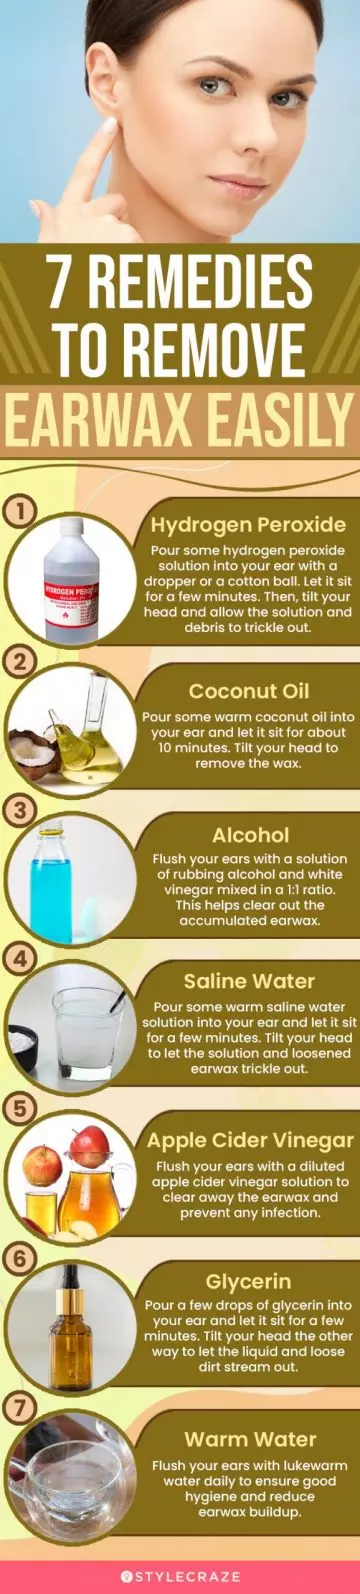 7 remedies to remove earwax easily (infographic)